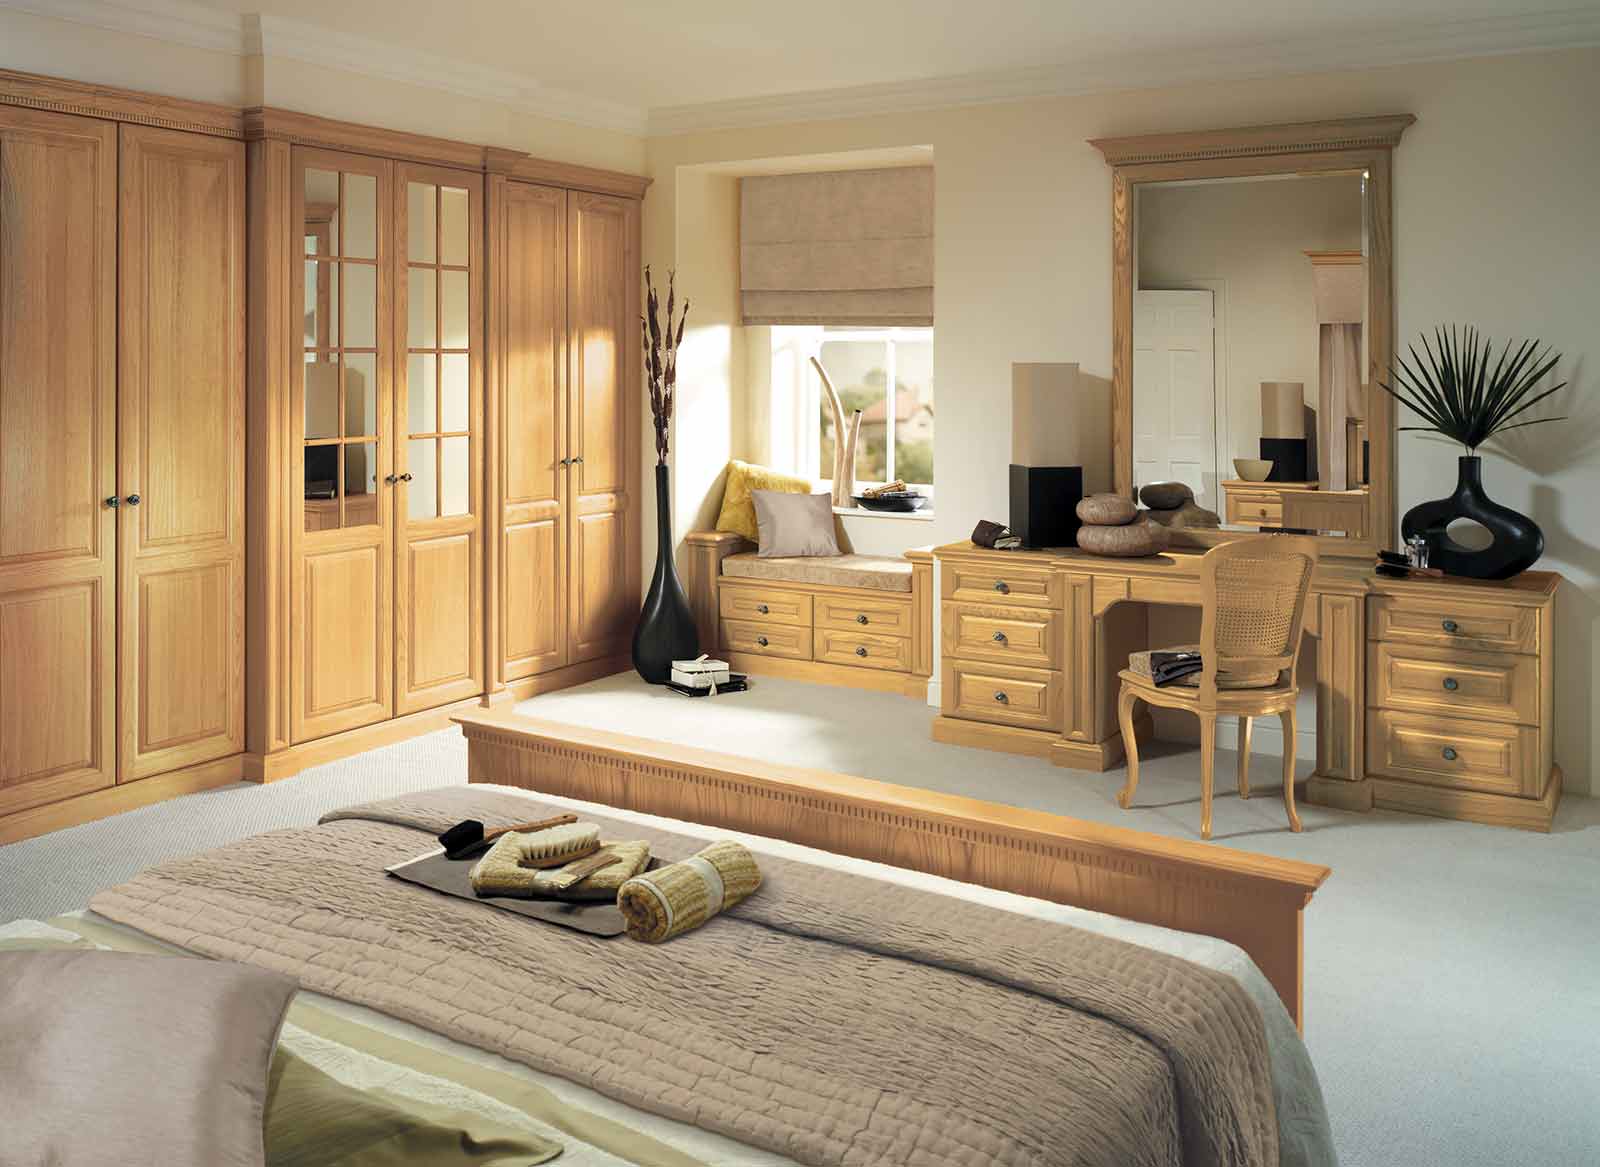 fitted bedroom furniture ideas